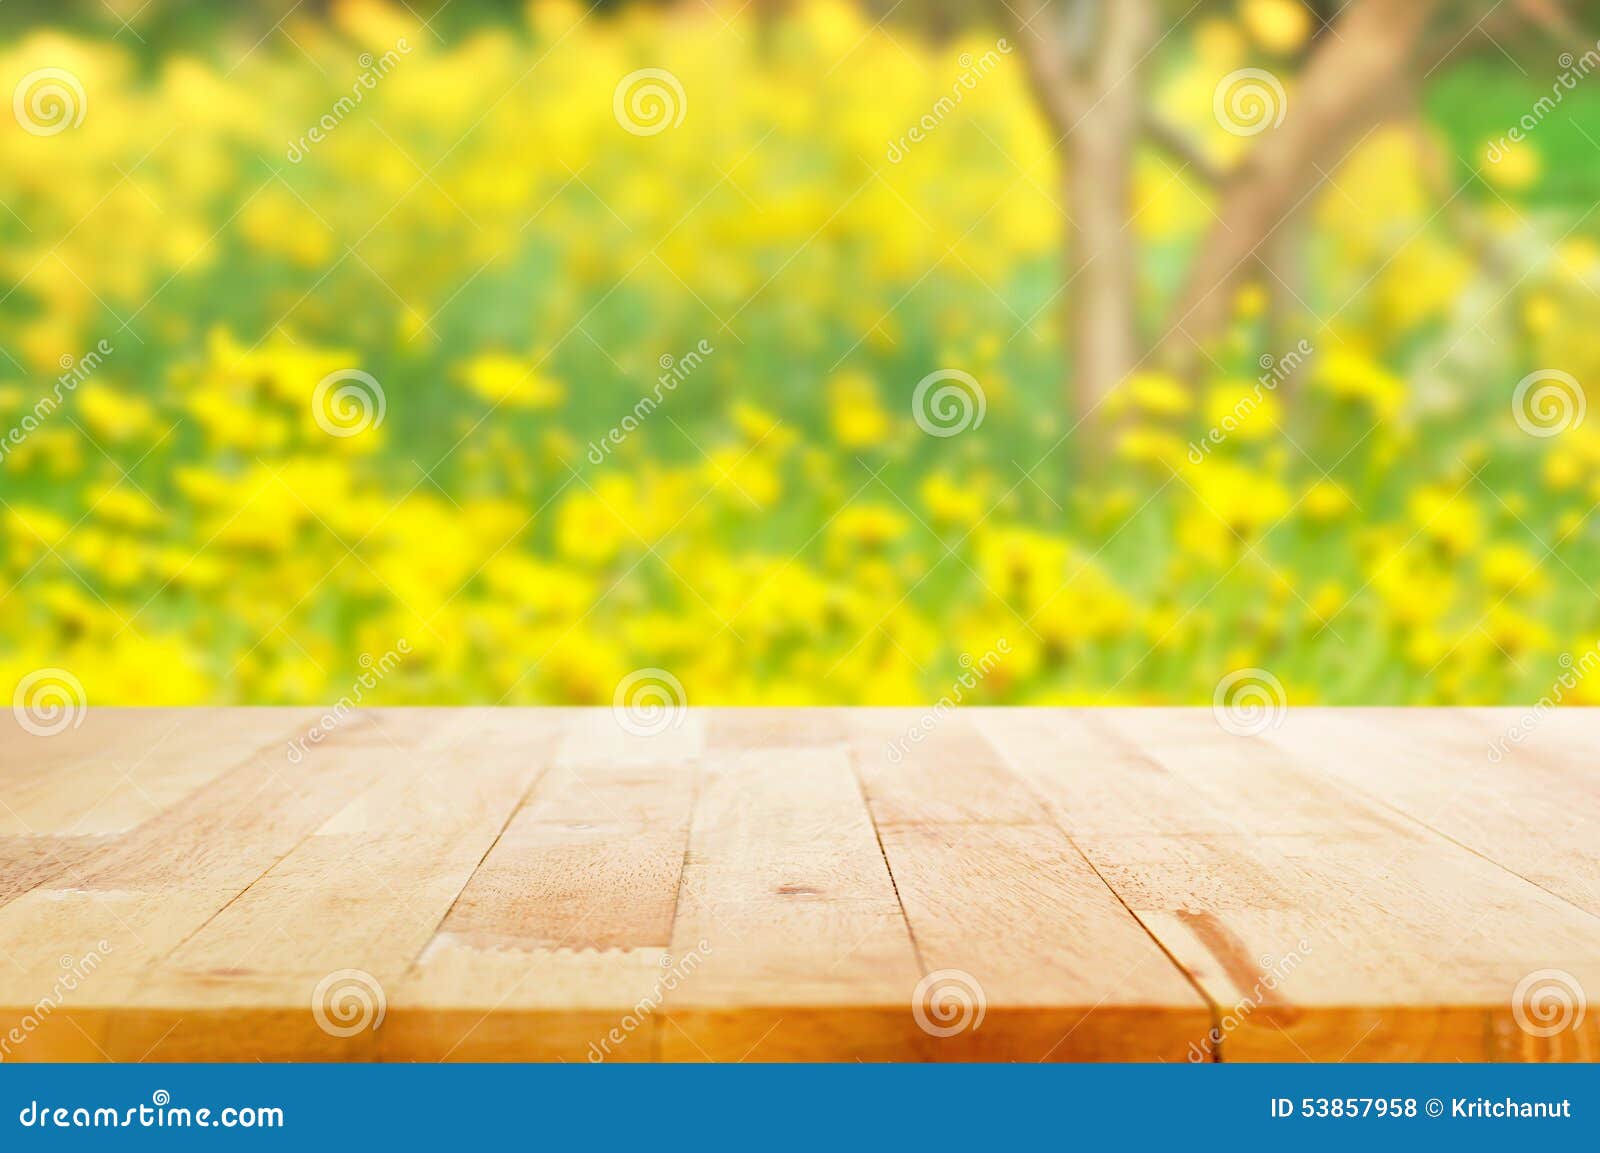 Wood Table Top On Blurred Background Of Yellow Flower Garden Stock Photo  53857958 - Megapixl